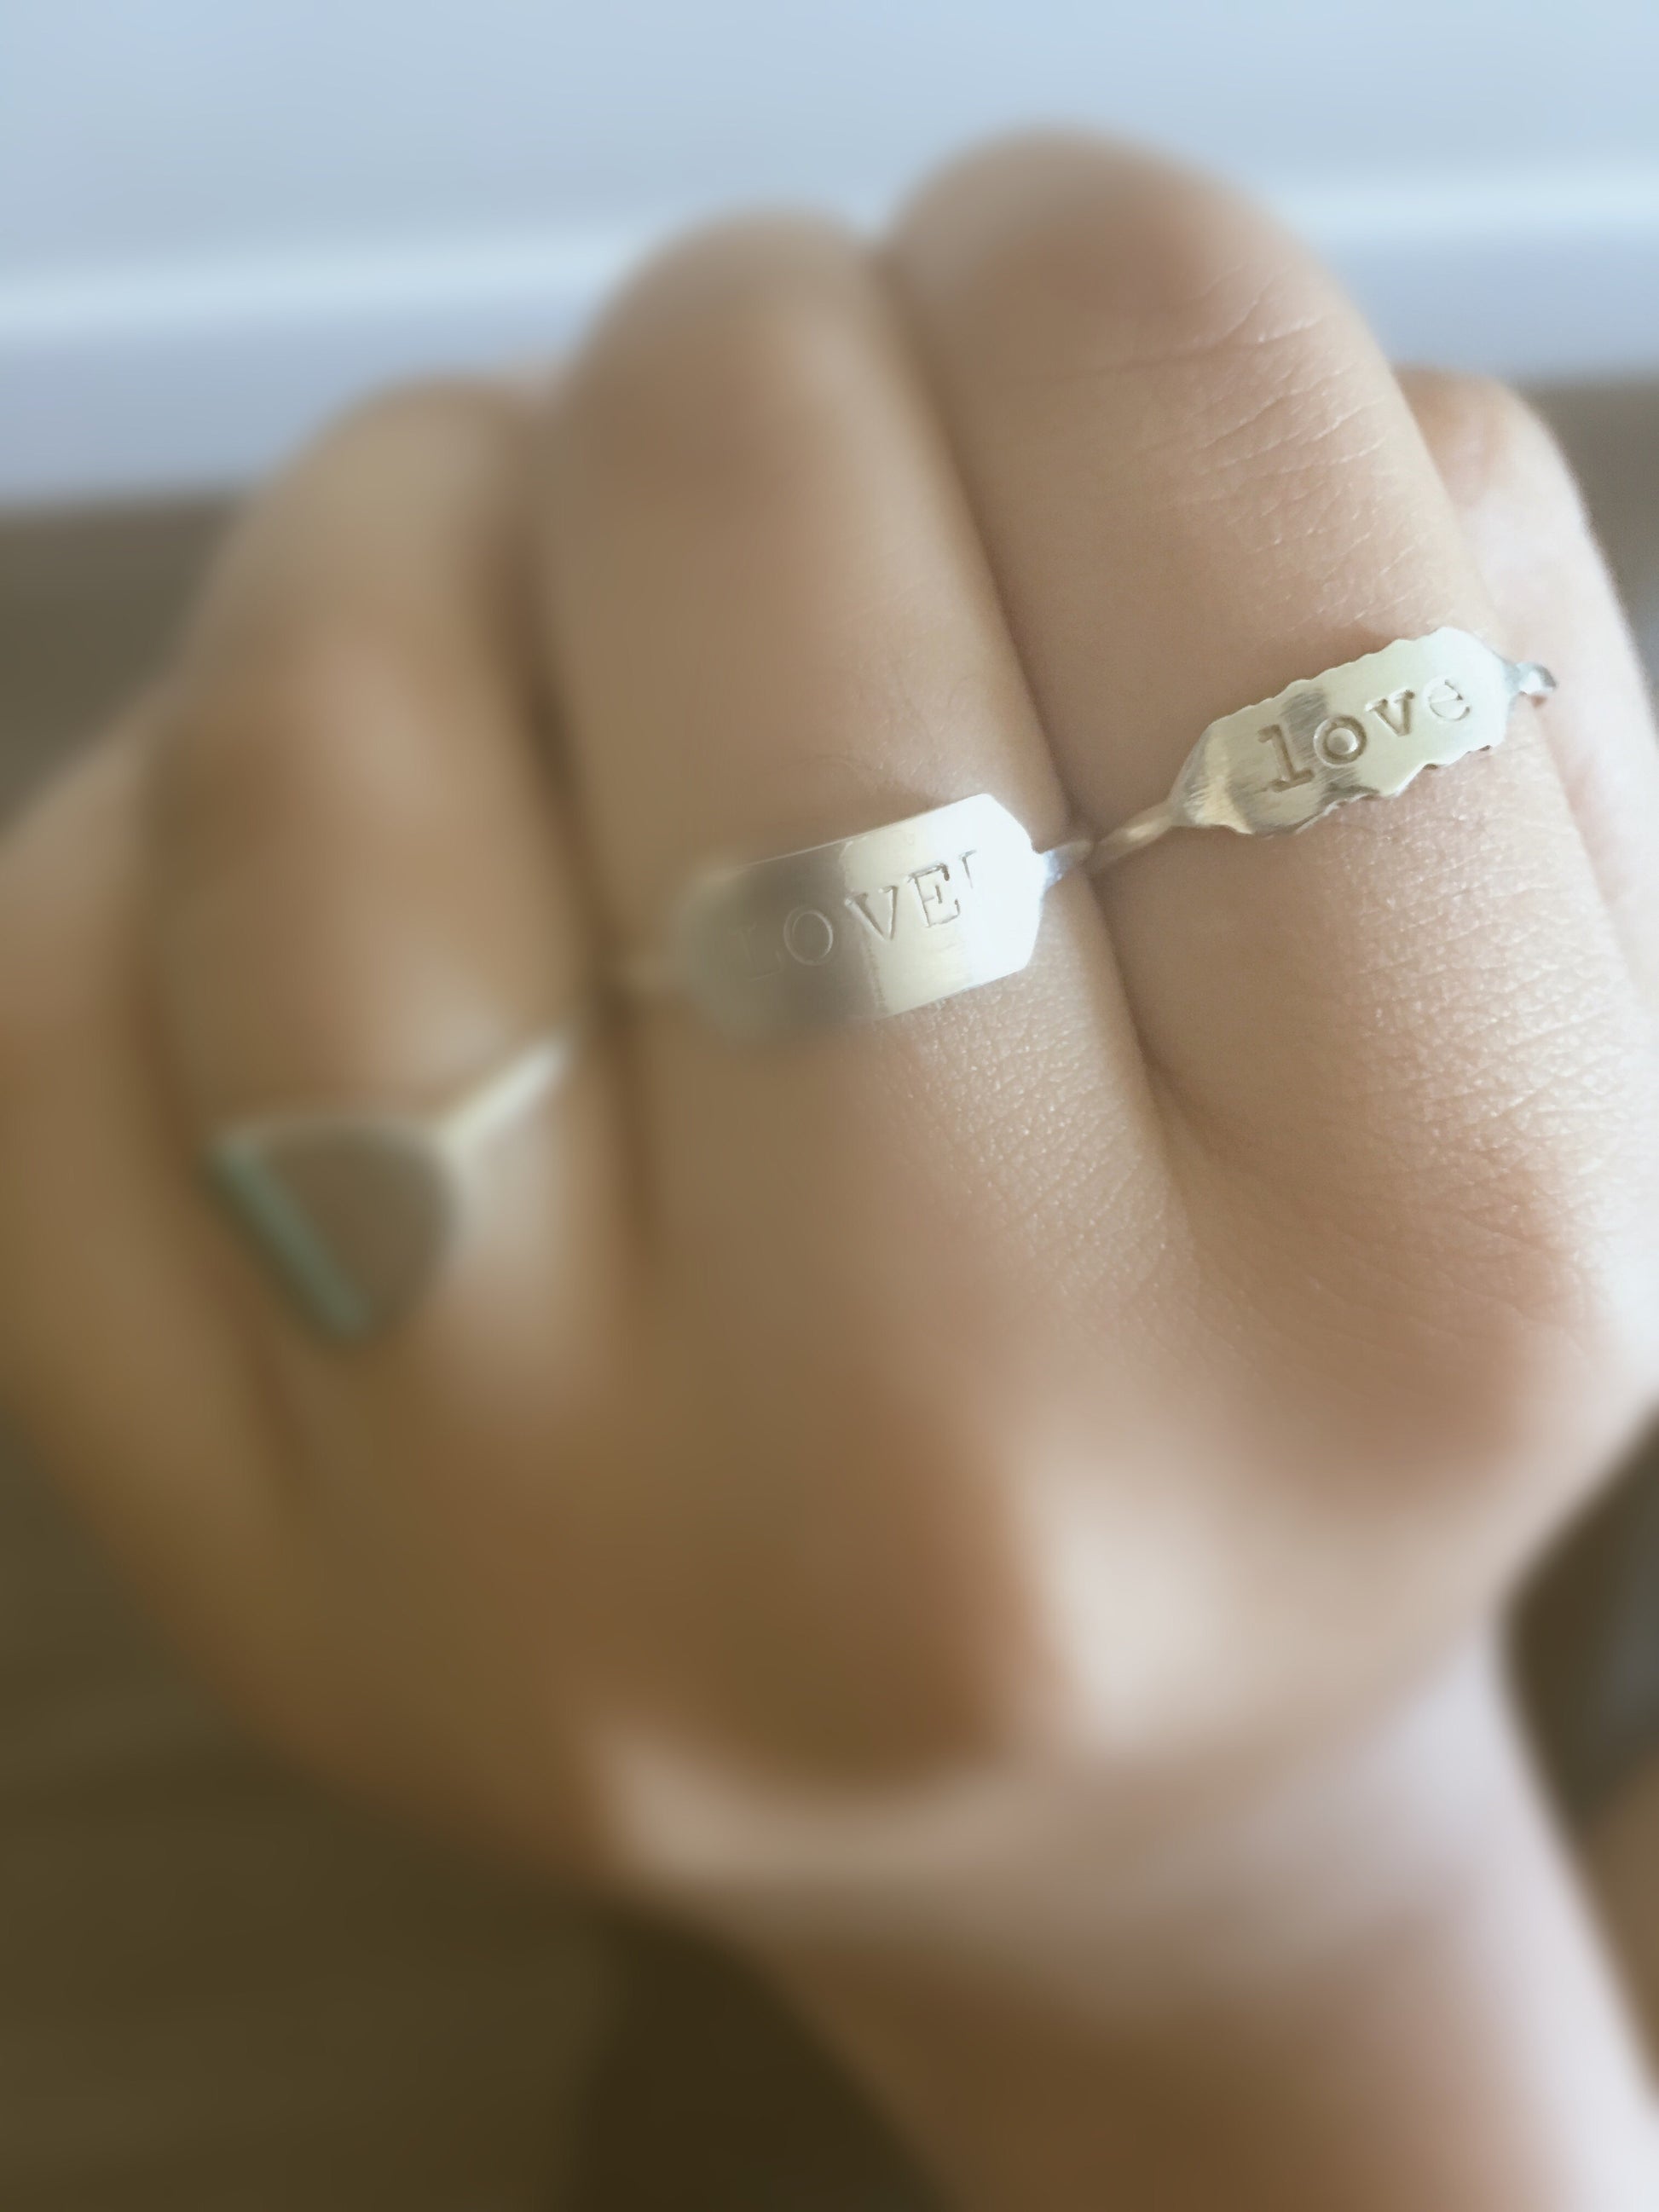 love letters ring in sterling silver - andJules Jewelry